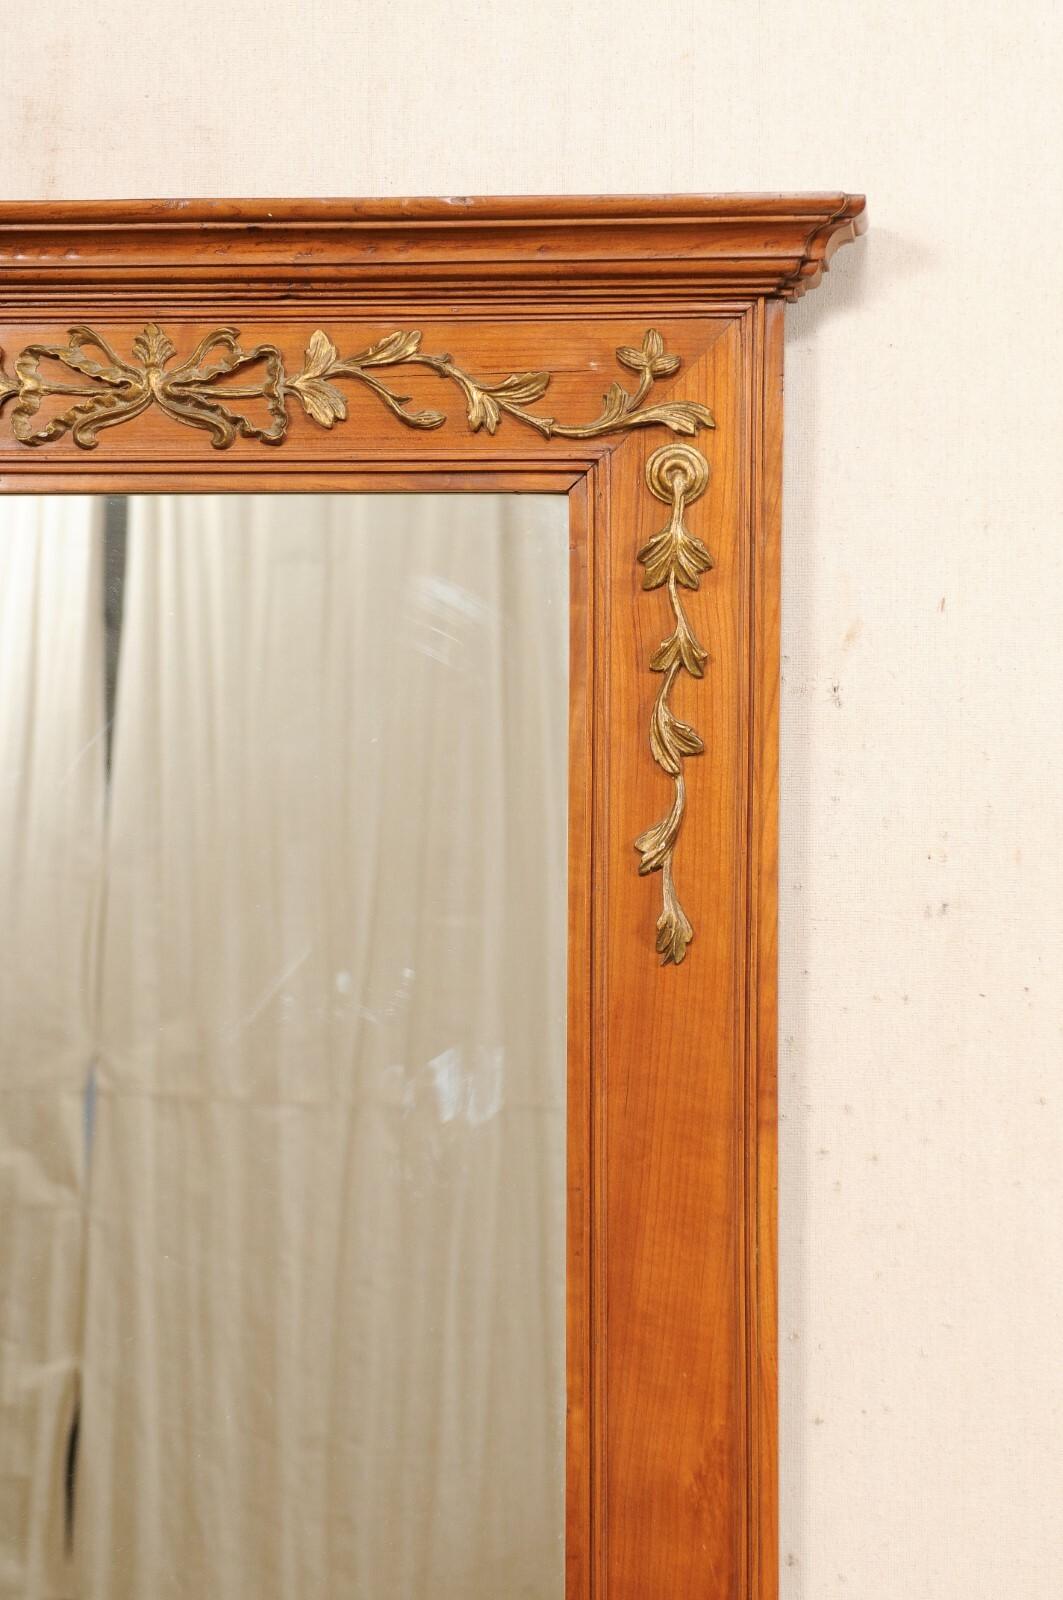 French Antique 4ft Tall Wooden Mirror w/Neoclassic Bow-Tie & Garland Accents For Sale 1